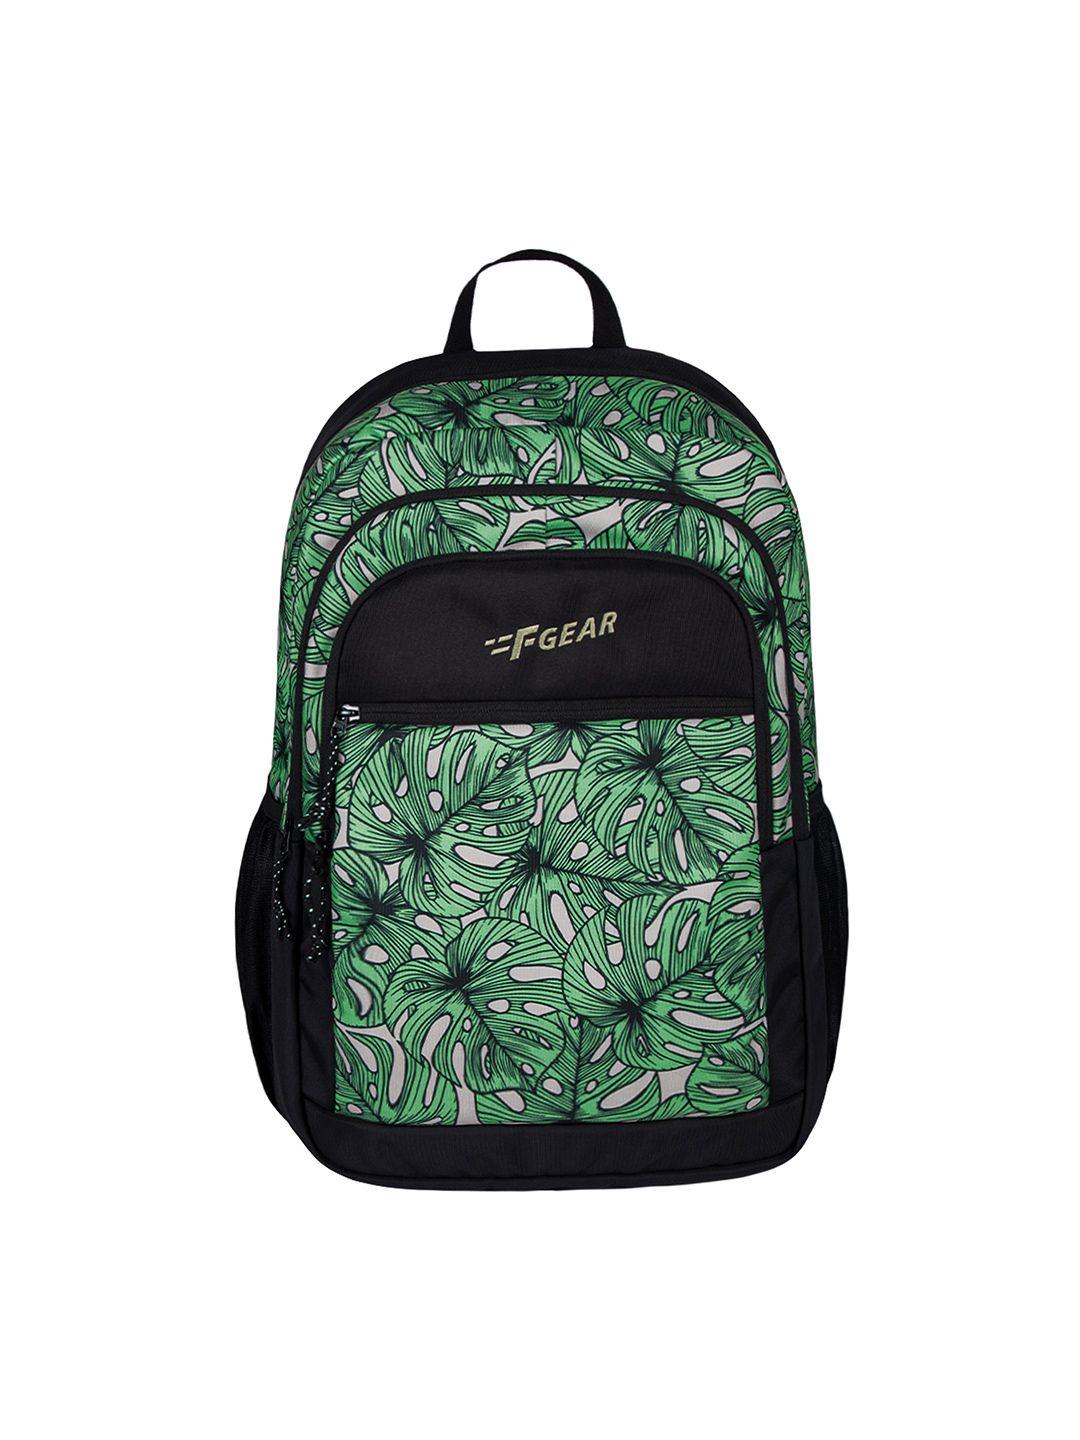 f gear graphic printed contrast detail backpack